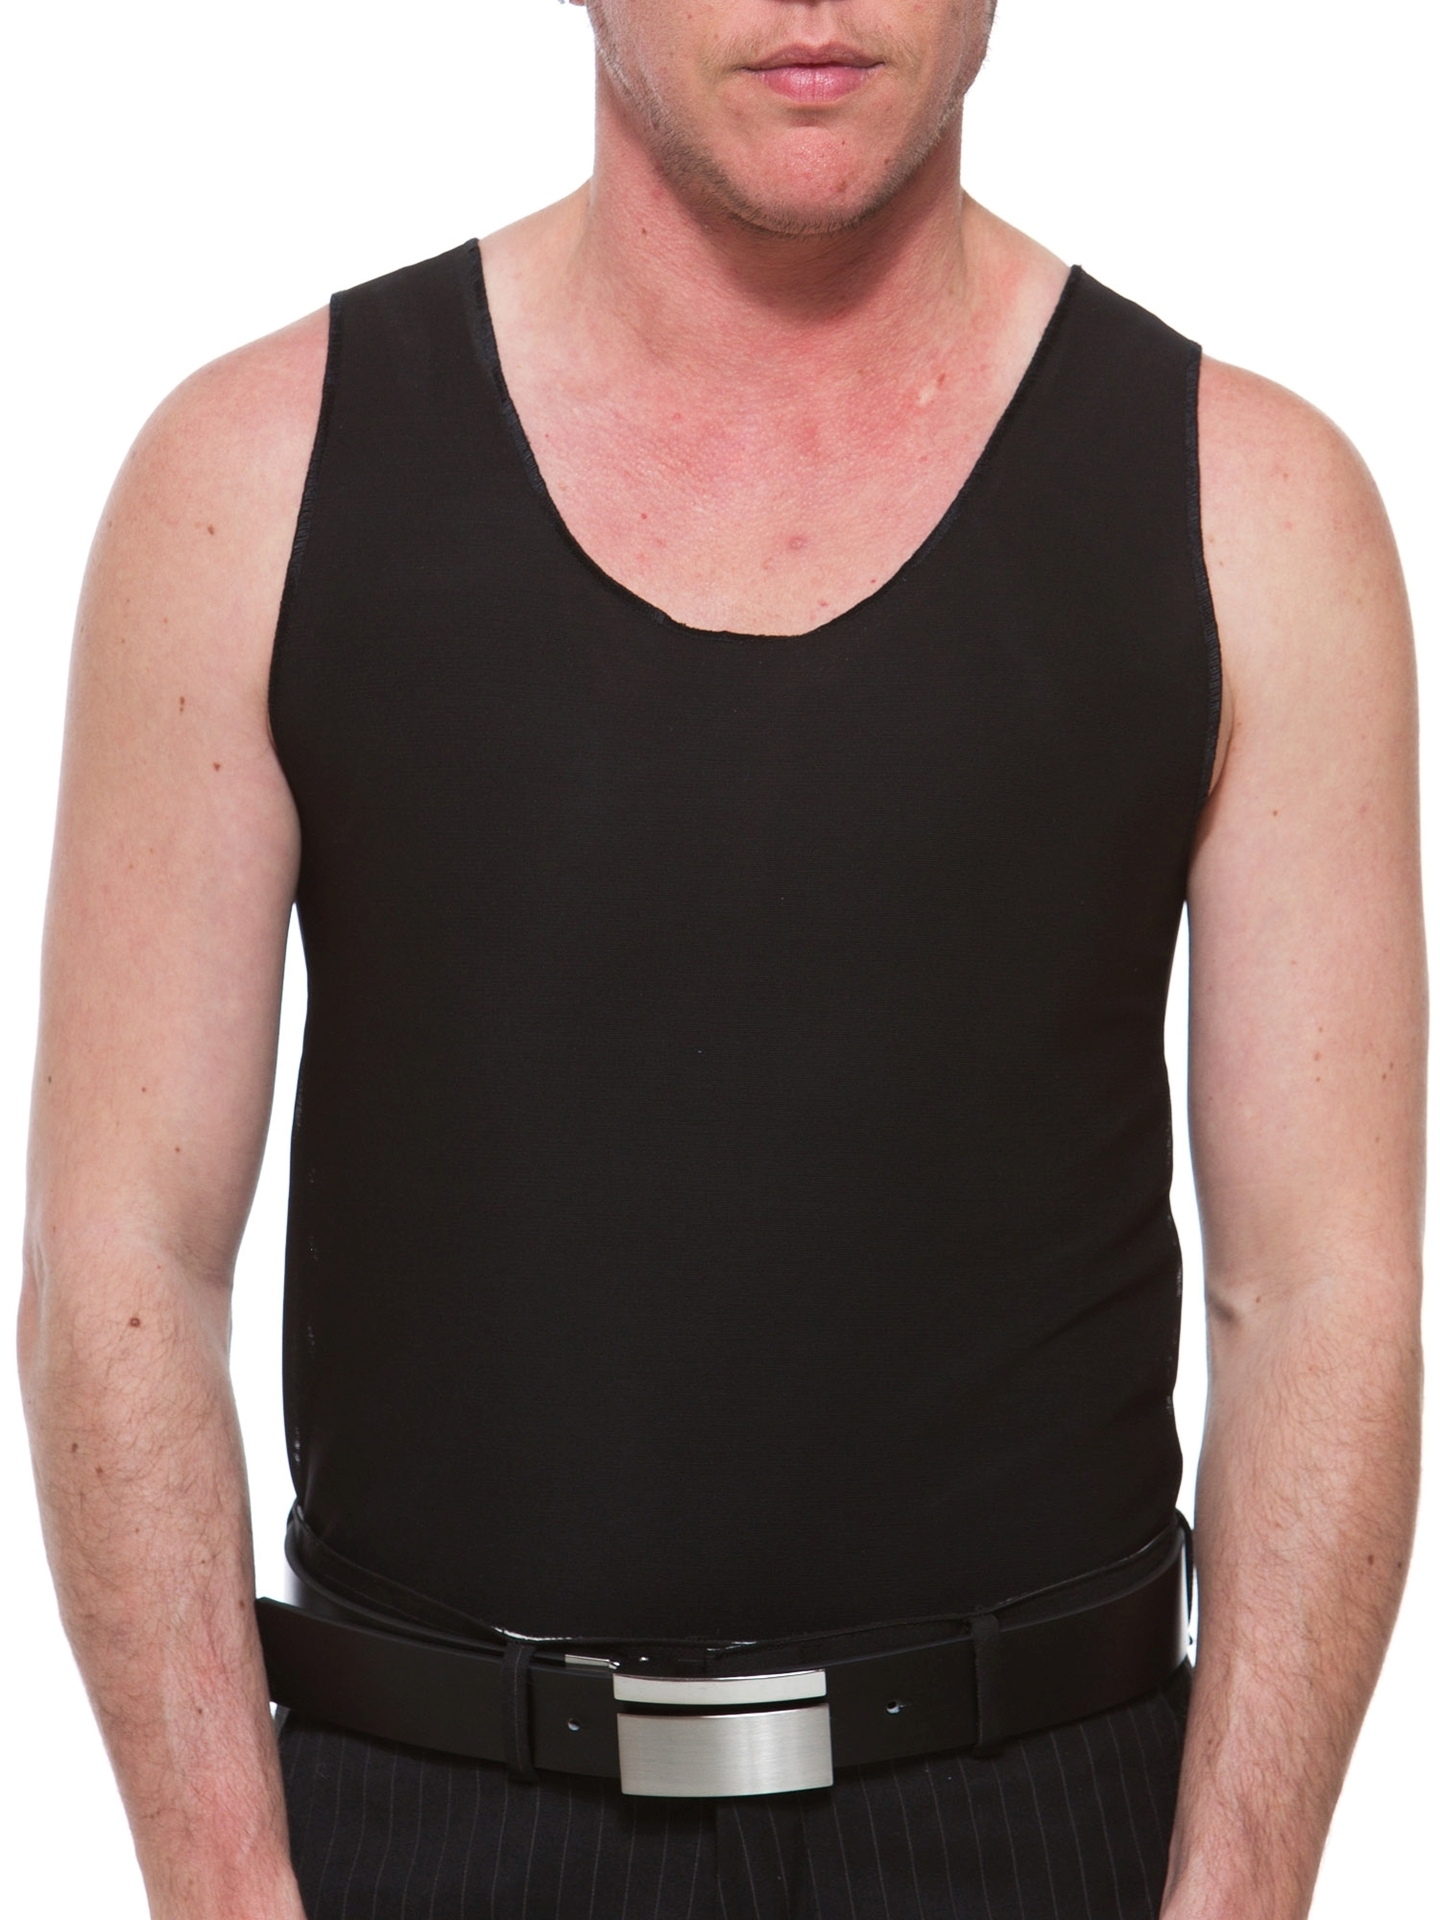 Ultimate Chest Binder Tank. FTM Chest Binders for Trans Men by